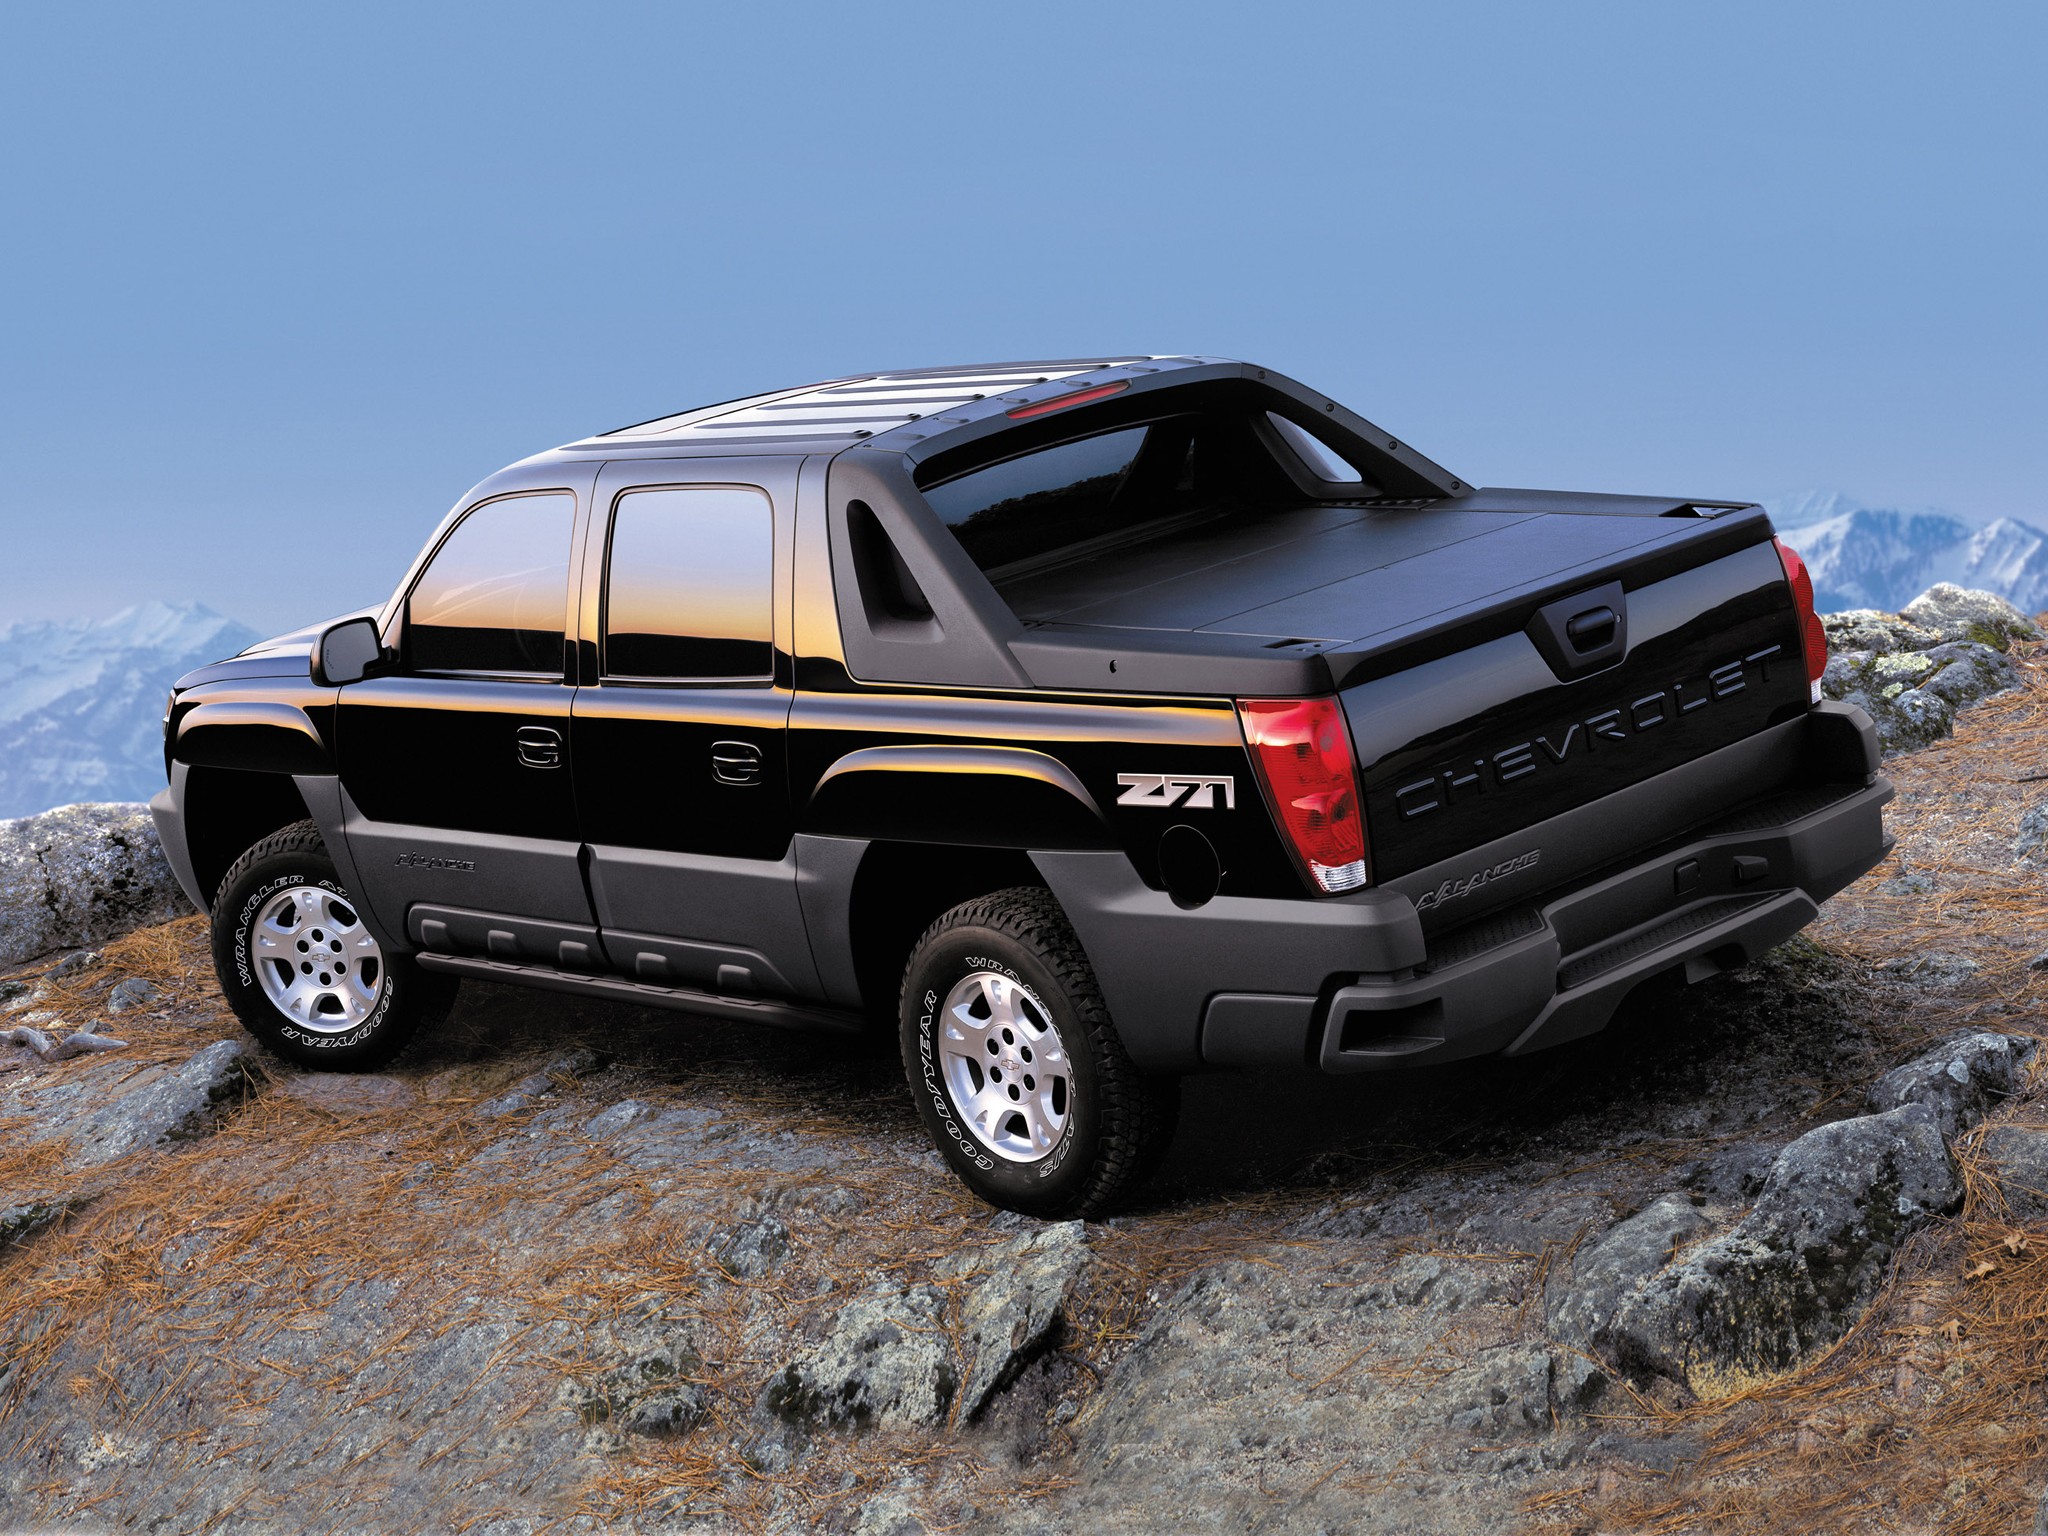 Chevy Avalanche Tailgate Flash Sales, 60% OFF | www.groupgolden.com